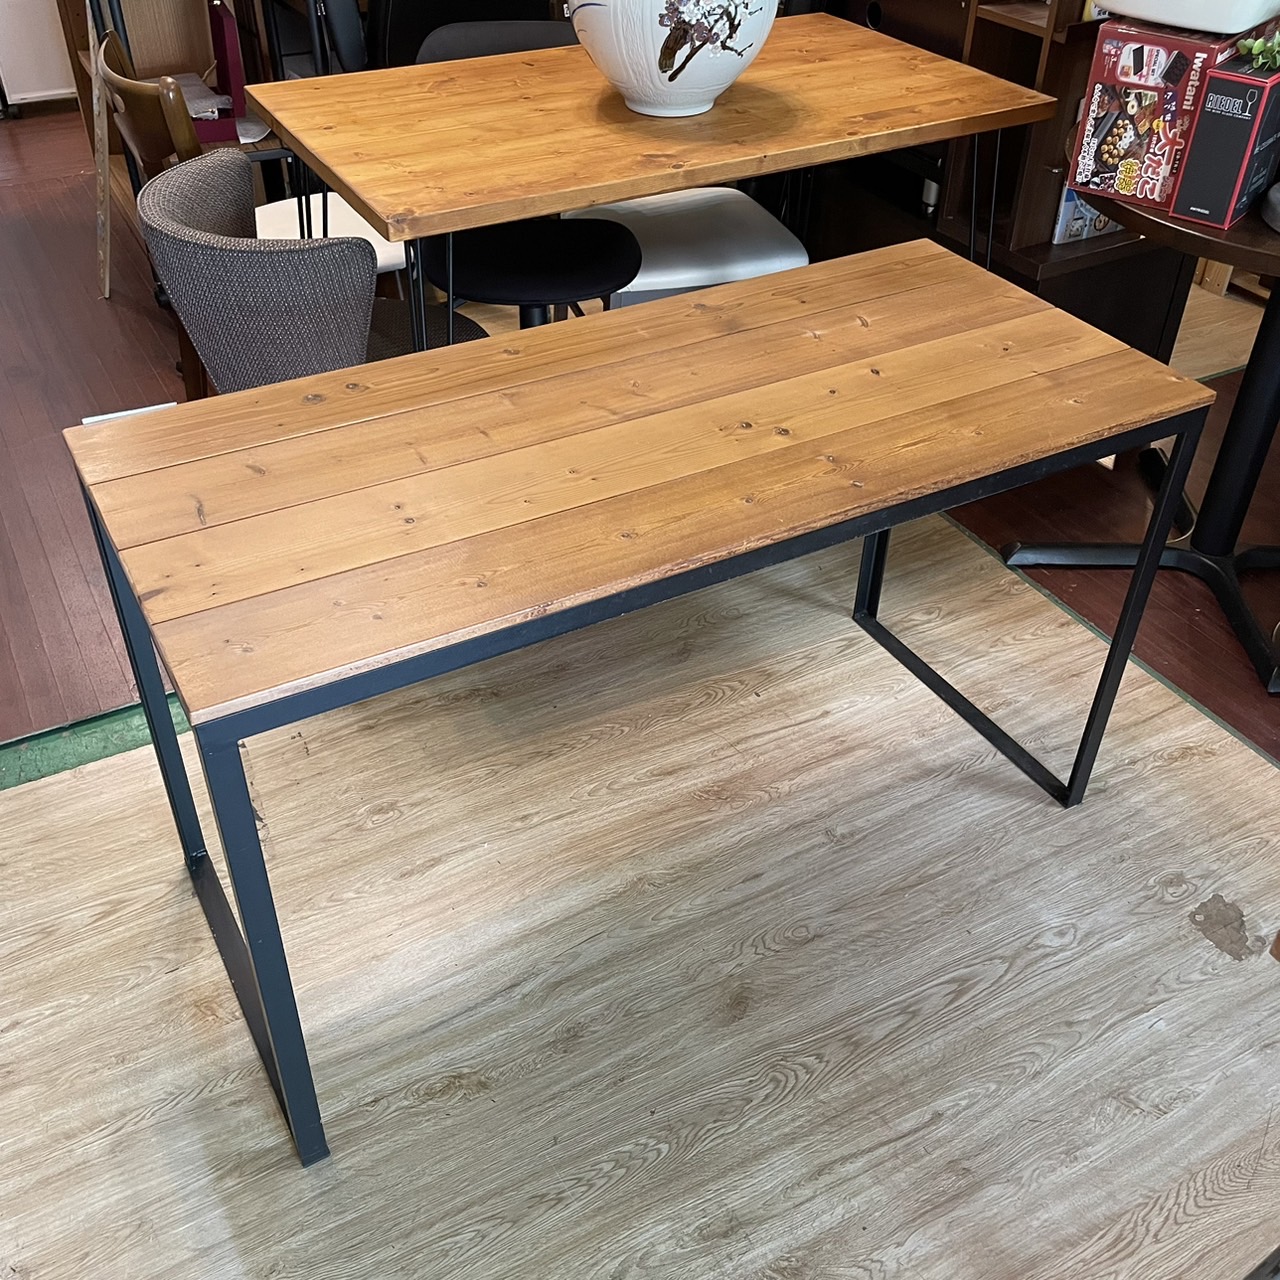 Desk with natural wood and iron legs